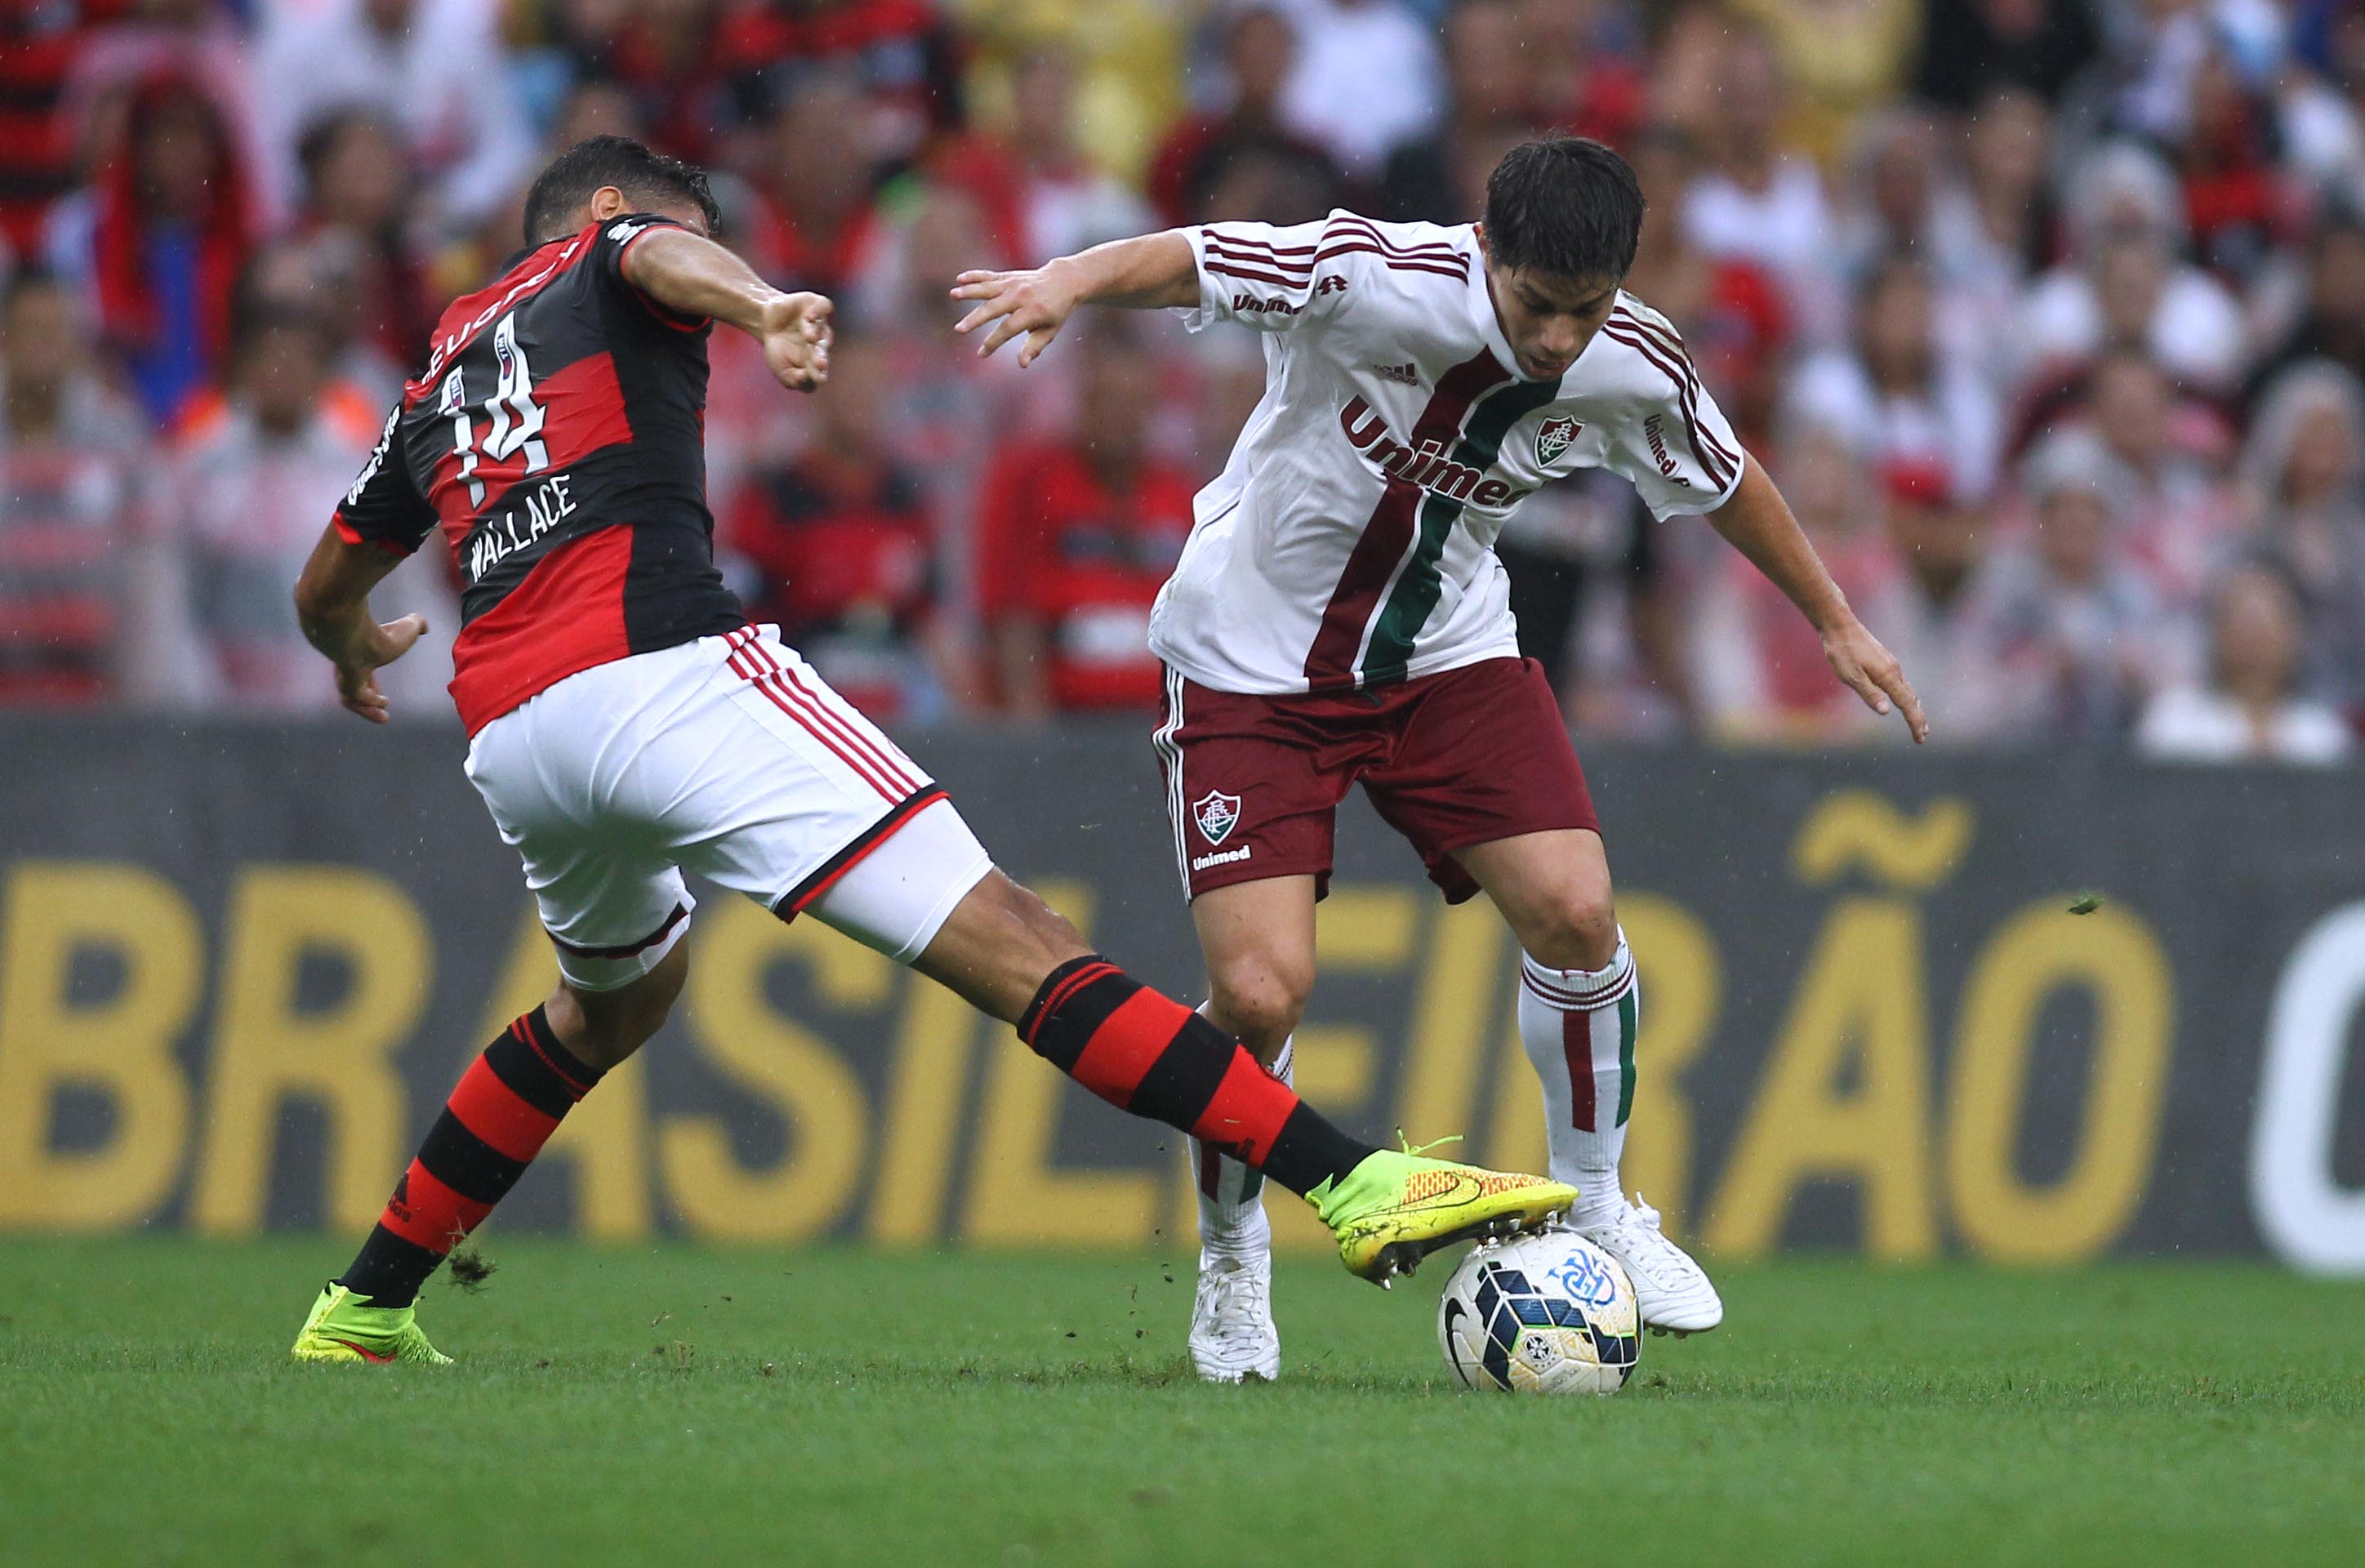 Campeonato Carioca to Kickoff this Weekend in Rio